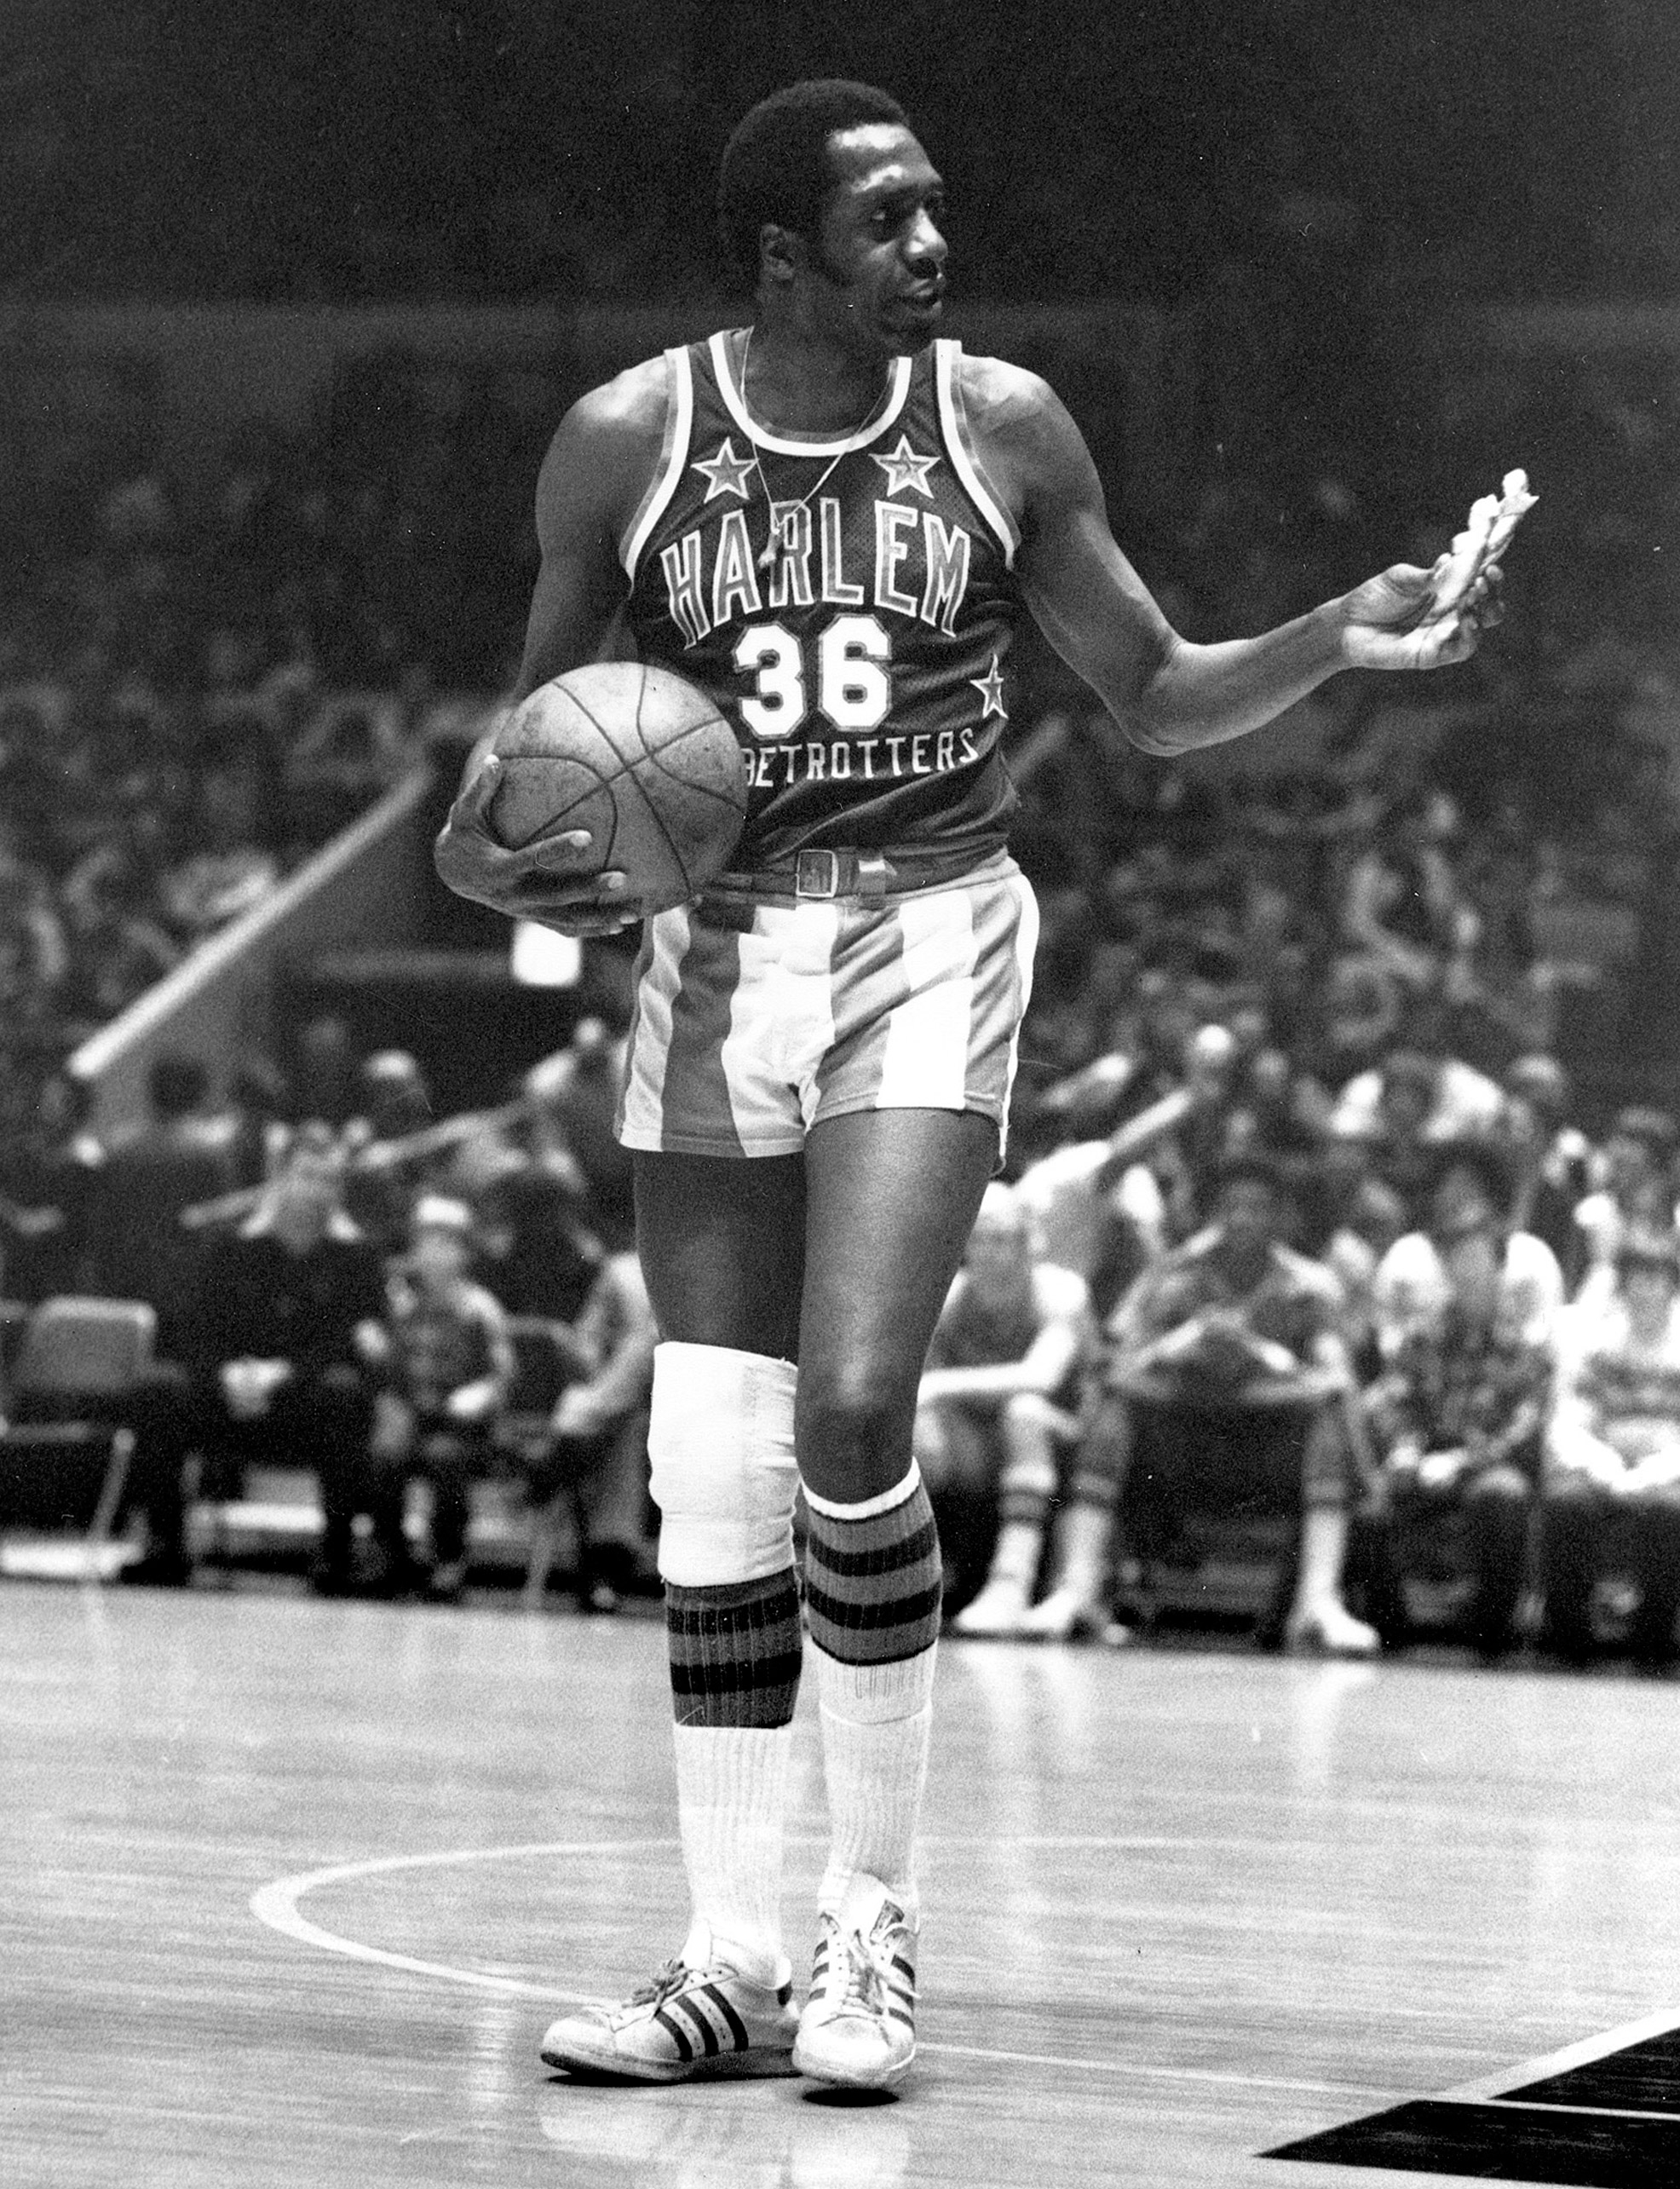 Meadowlark Lemon of the Harlem Globetrotters basketball team offers a pretzel to a referee during a game at New York's Madison Square Garden in New York on Feb. 18, 1978. (Suzanne Vlamis—AP)